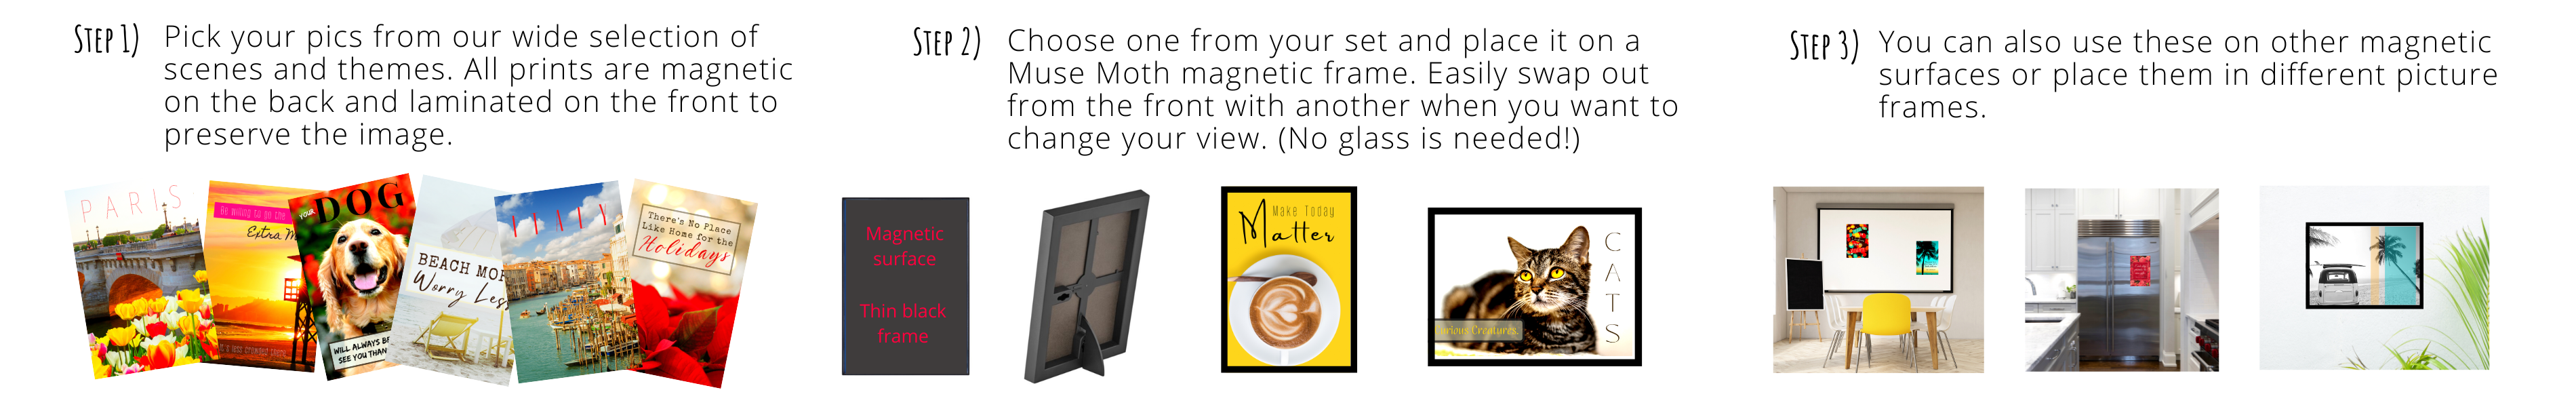 How to use Muse Moth magnetic prints